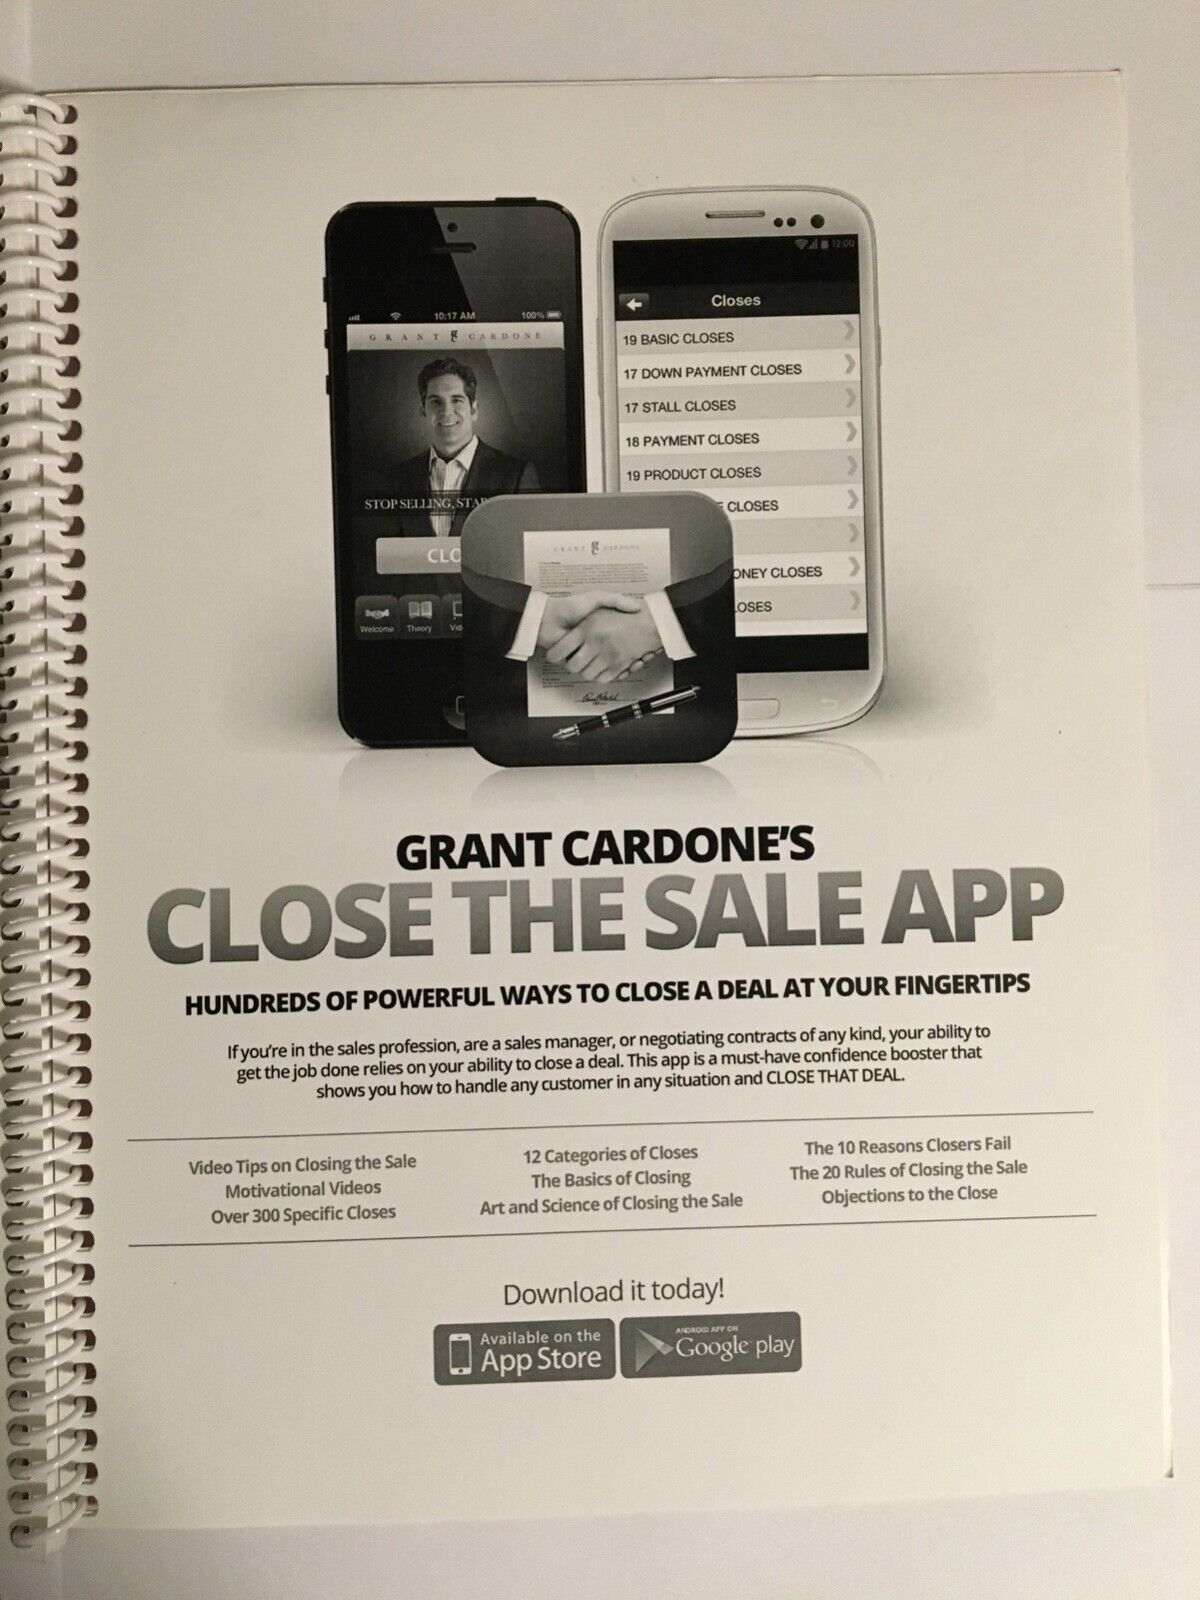 Sell or be Sold: Trainers Manual by Grant Cardone - Physical Workbook/Manual GC